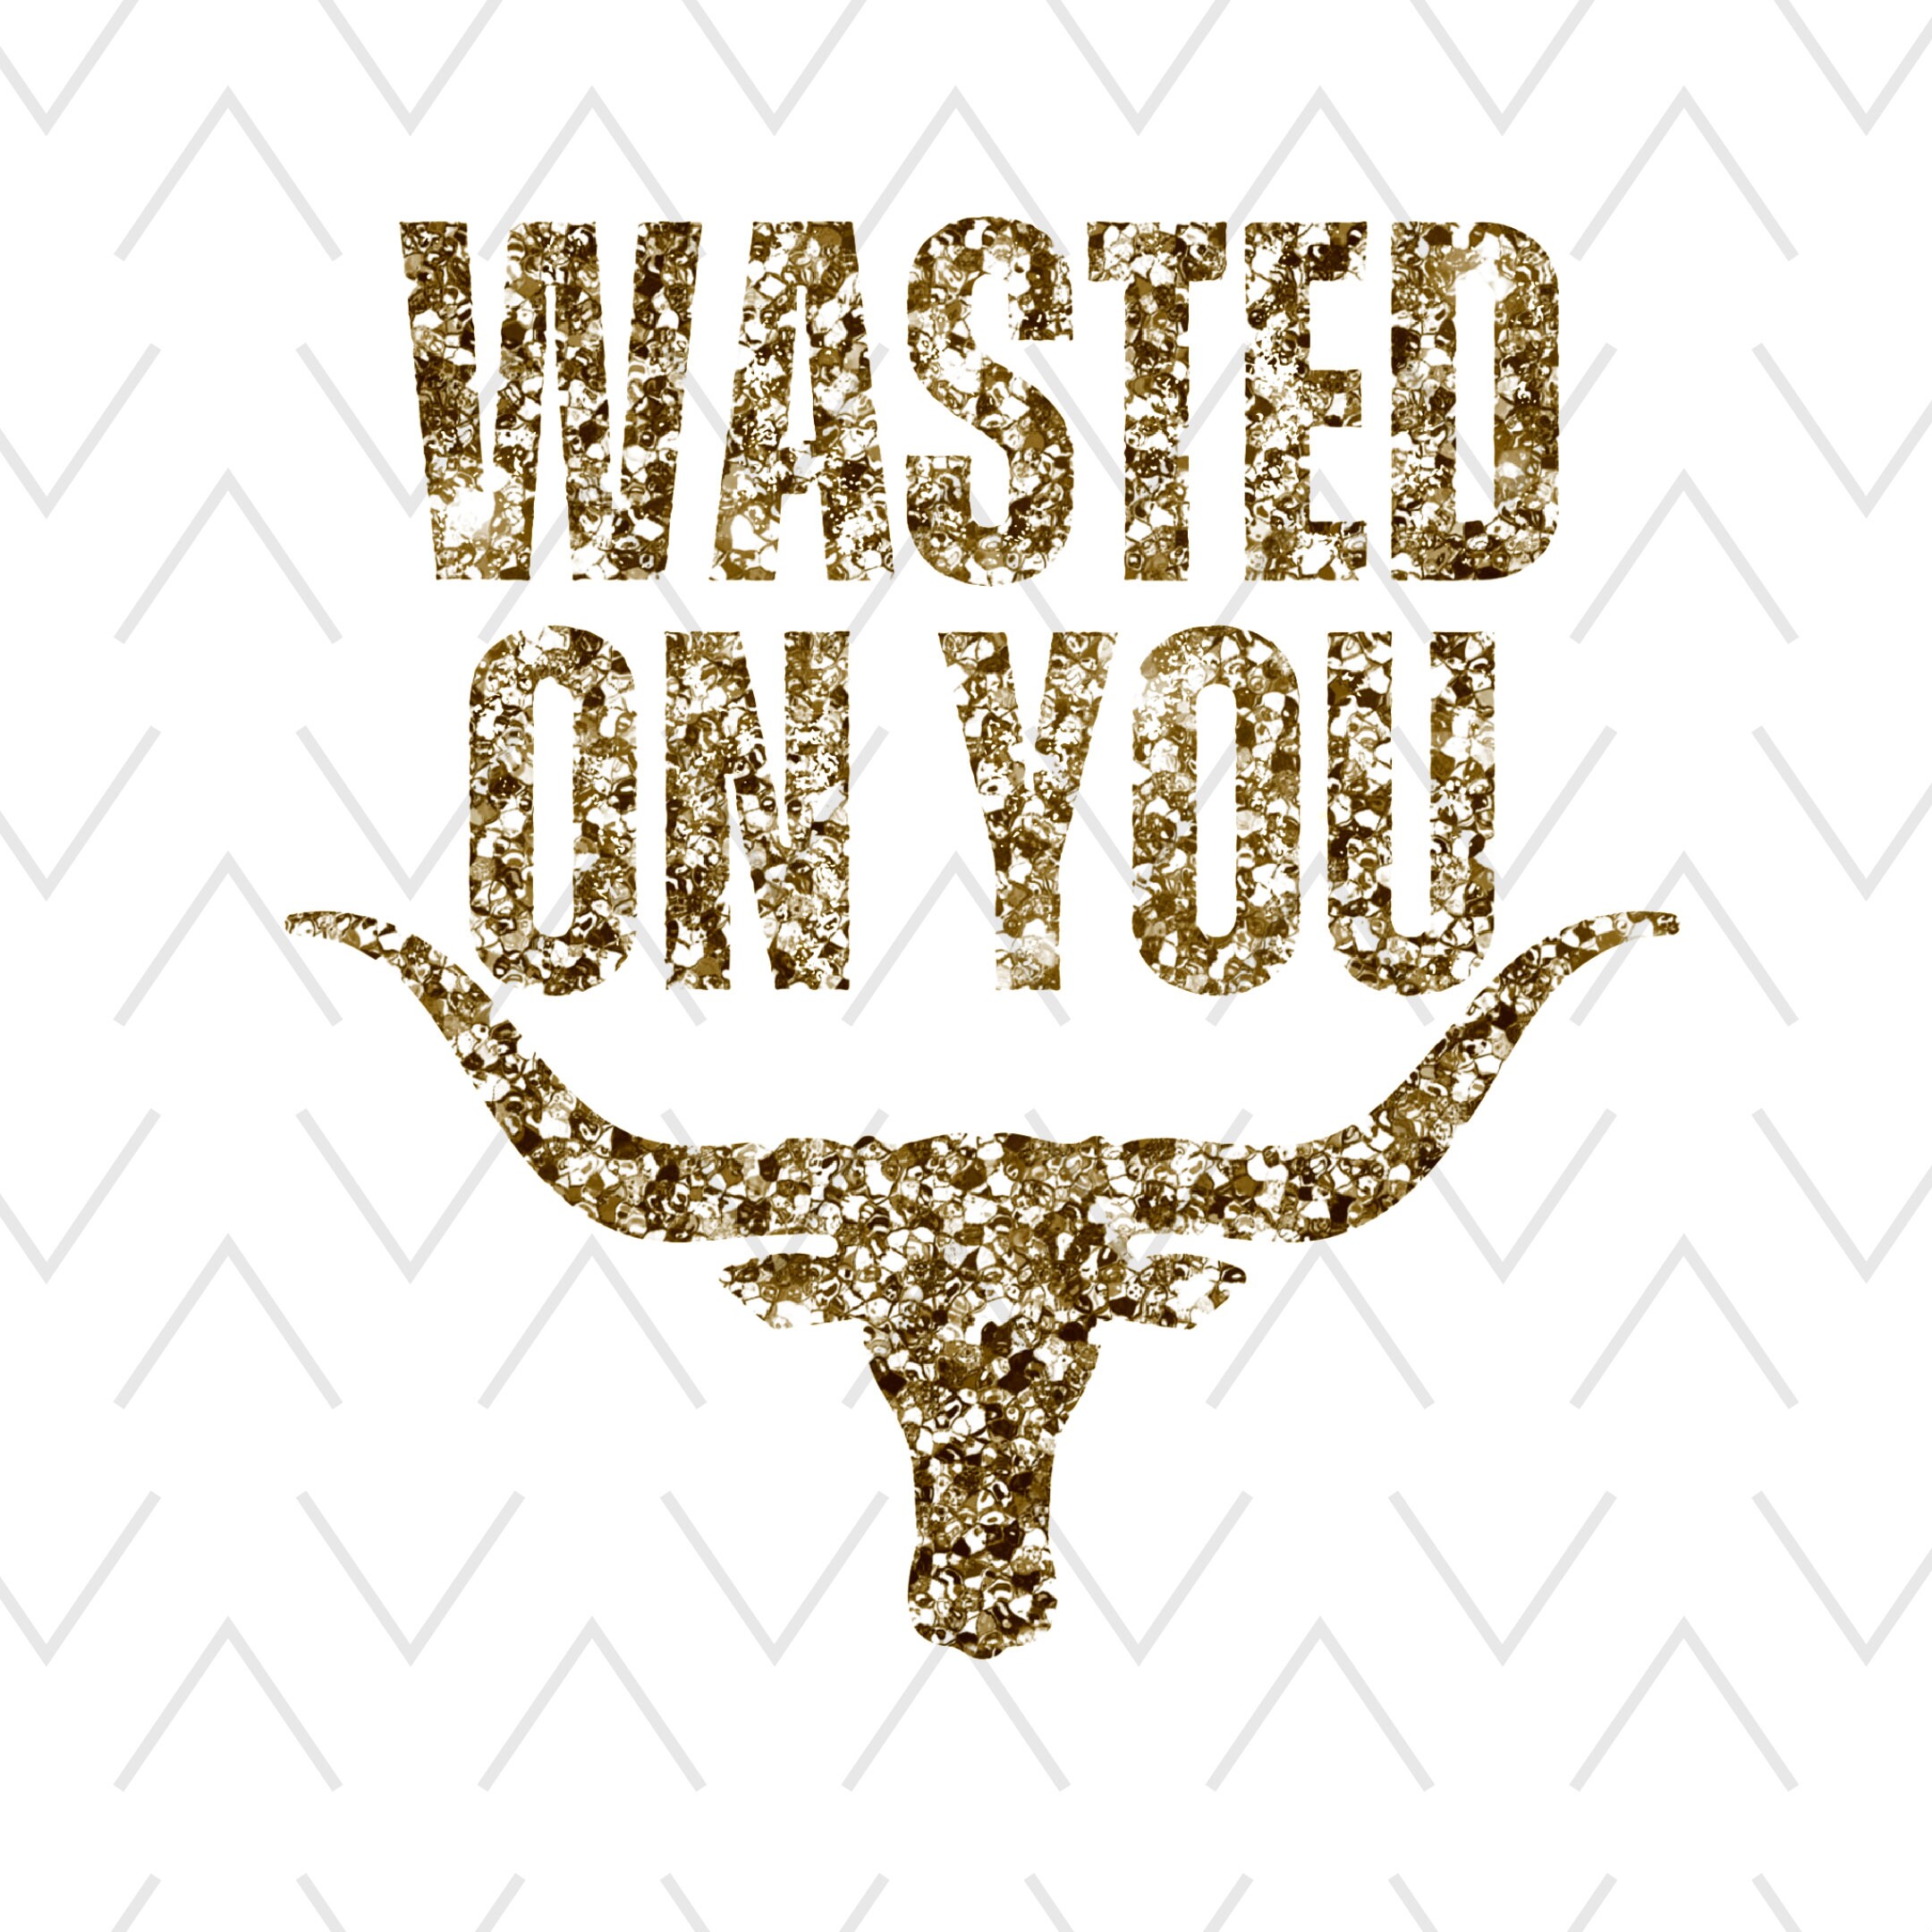 Wallen Western Wasted On You Png For Cricut Sublimation Files